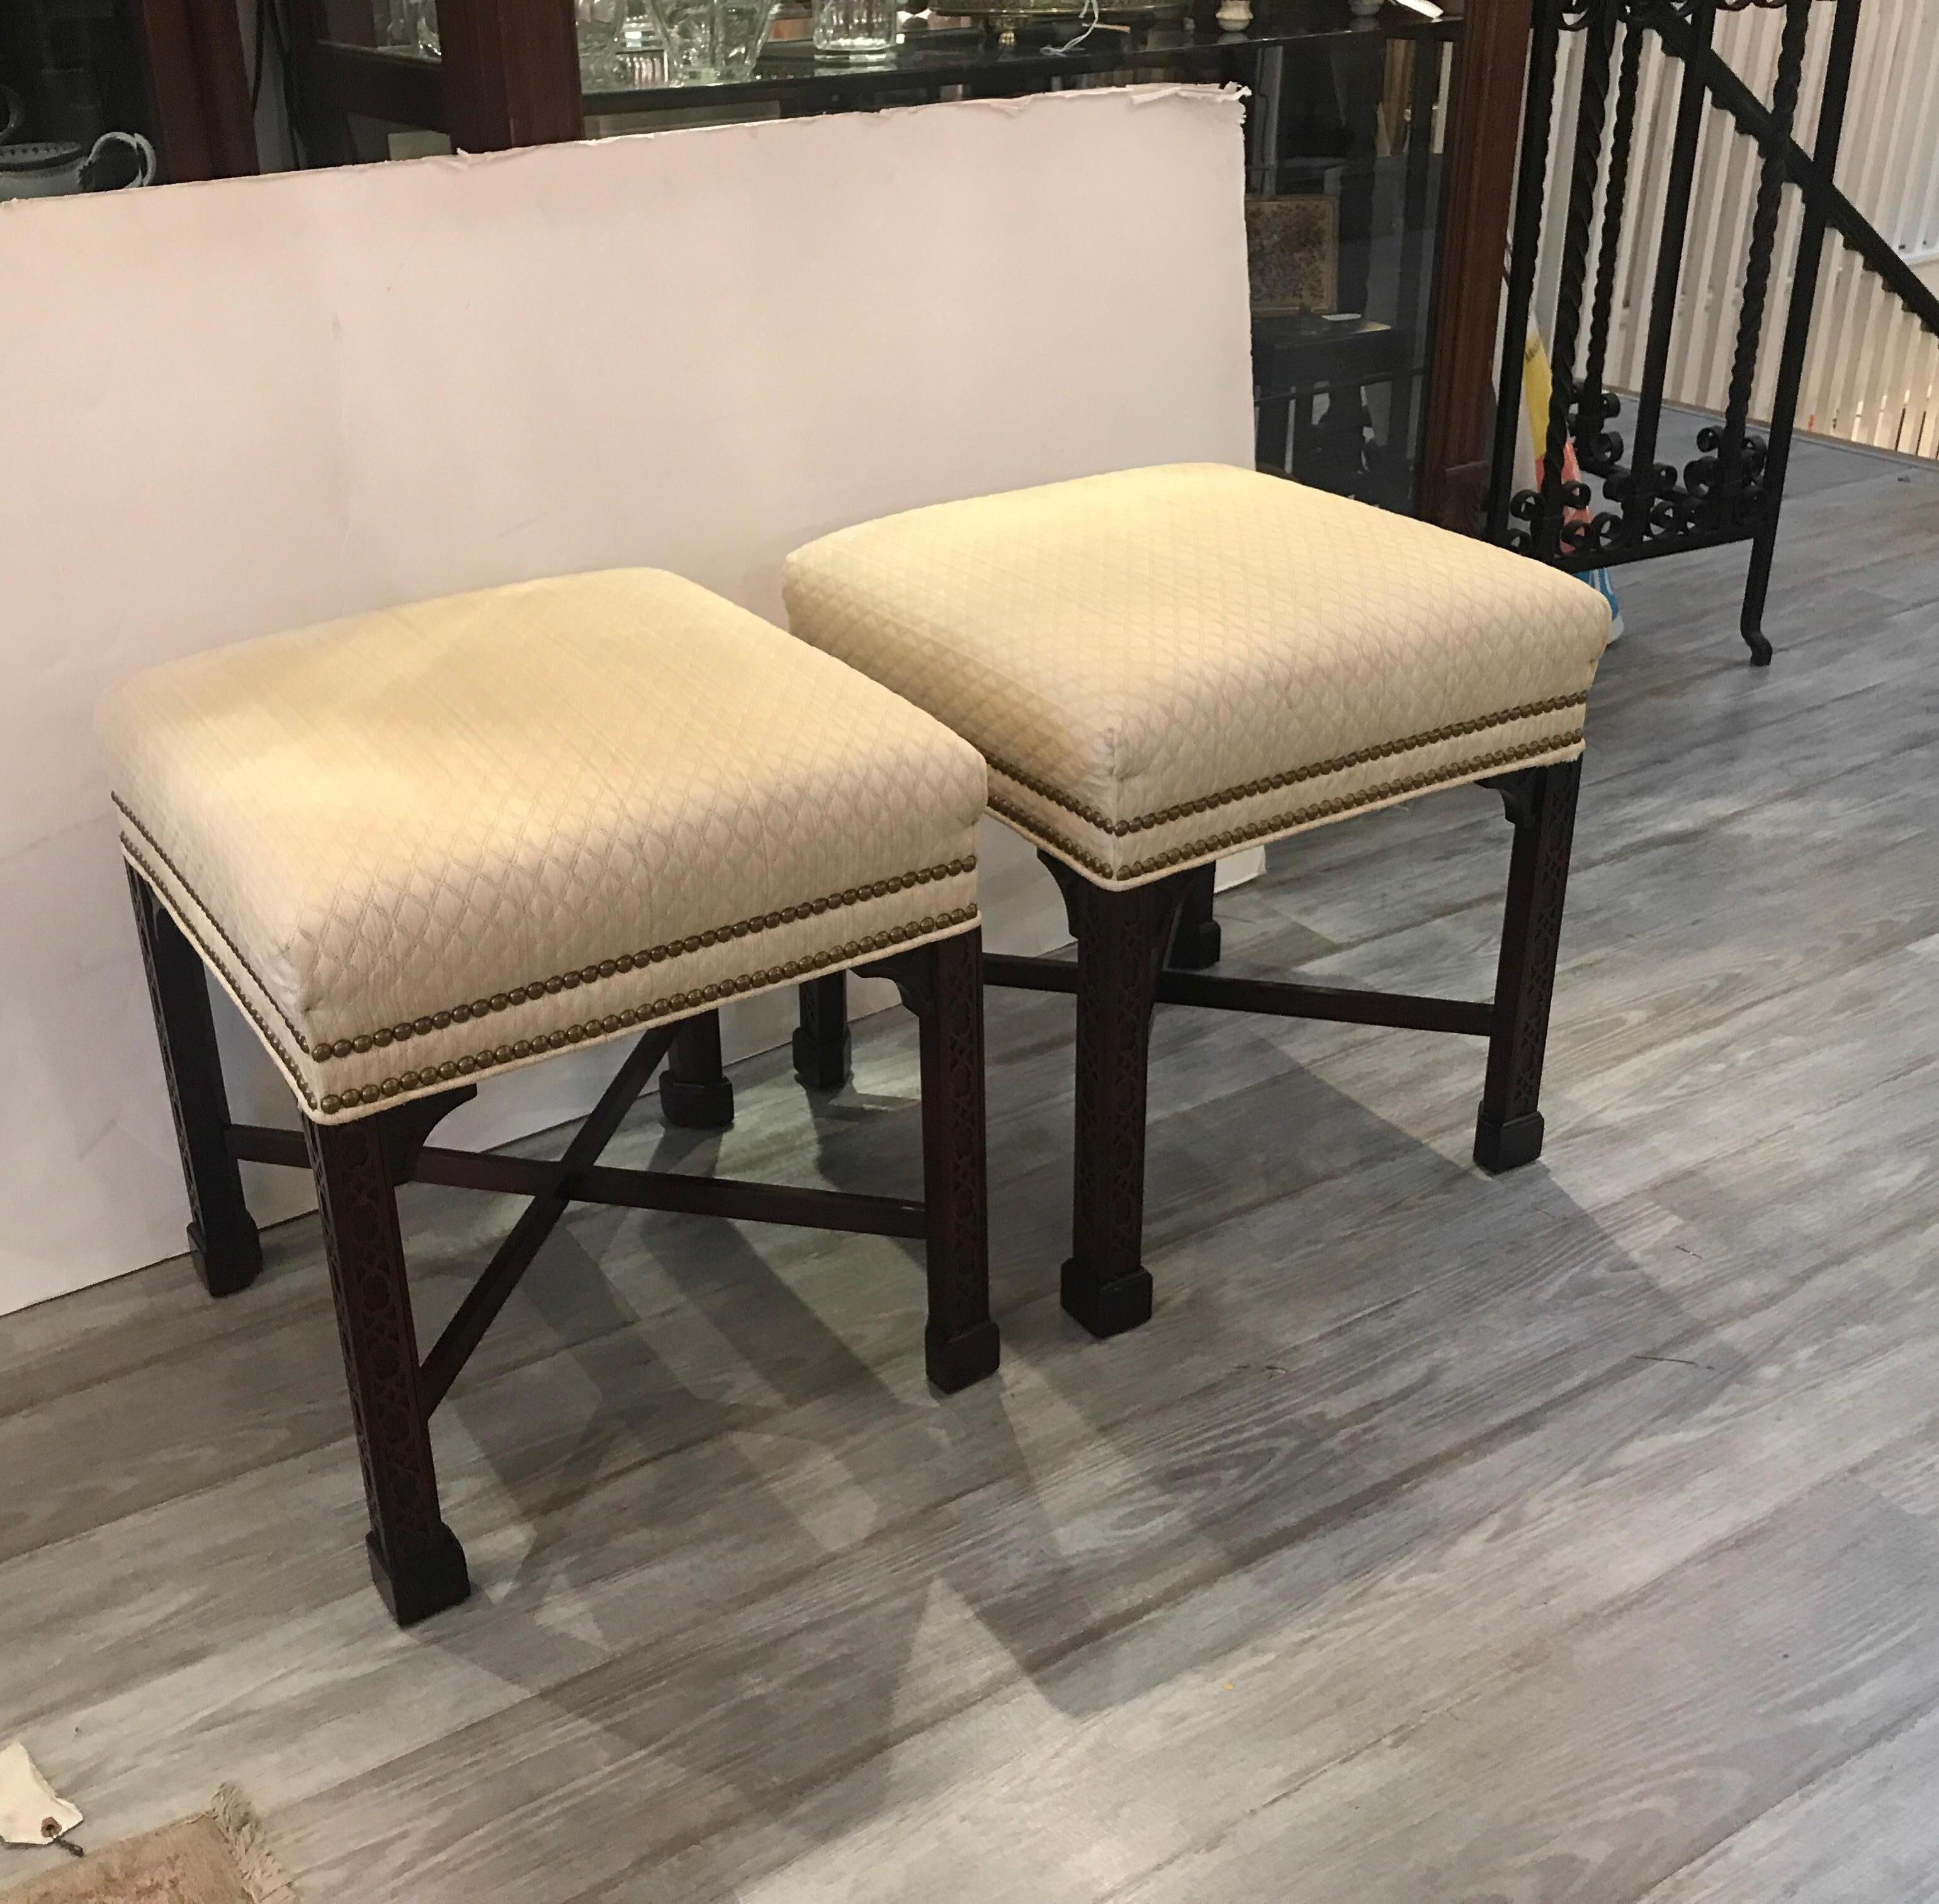 American A Pair of Chinese Chippendale Mahogany Benches W.J. Sloan